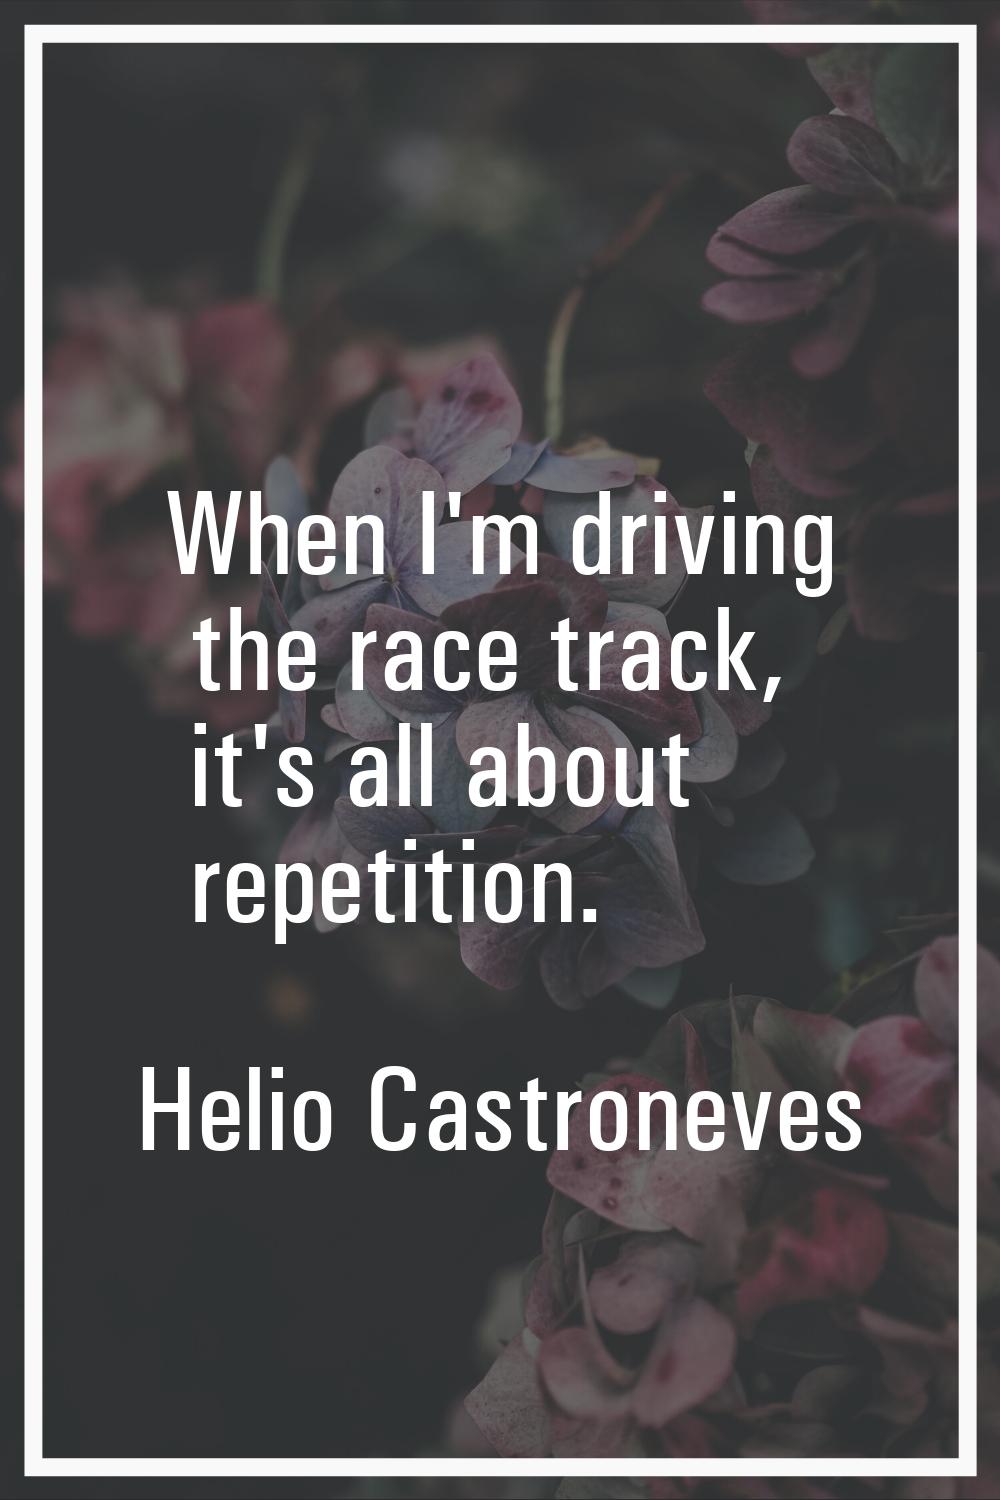 When I'm driving the race track, it's all about repetition.